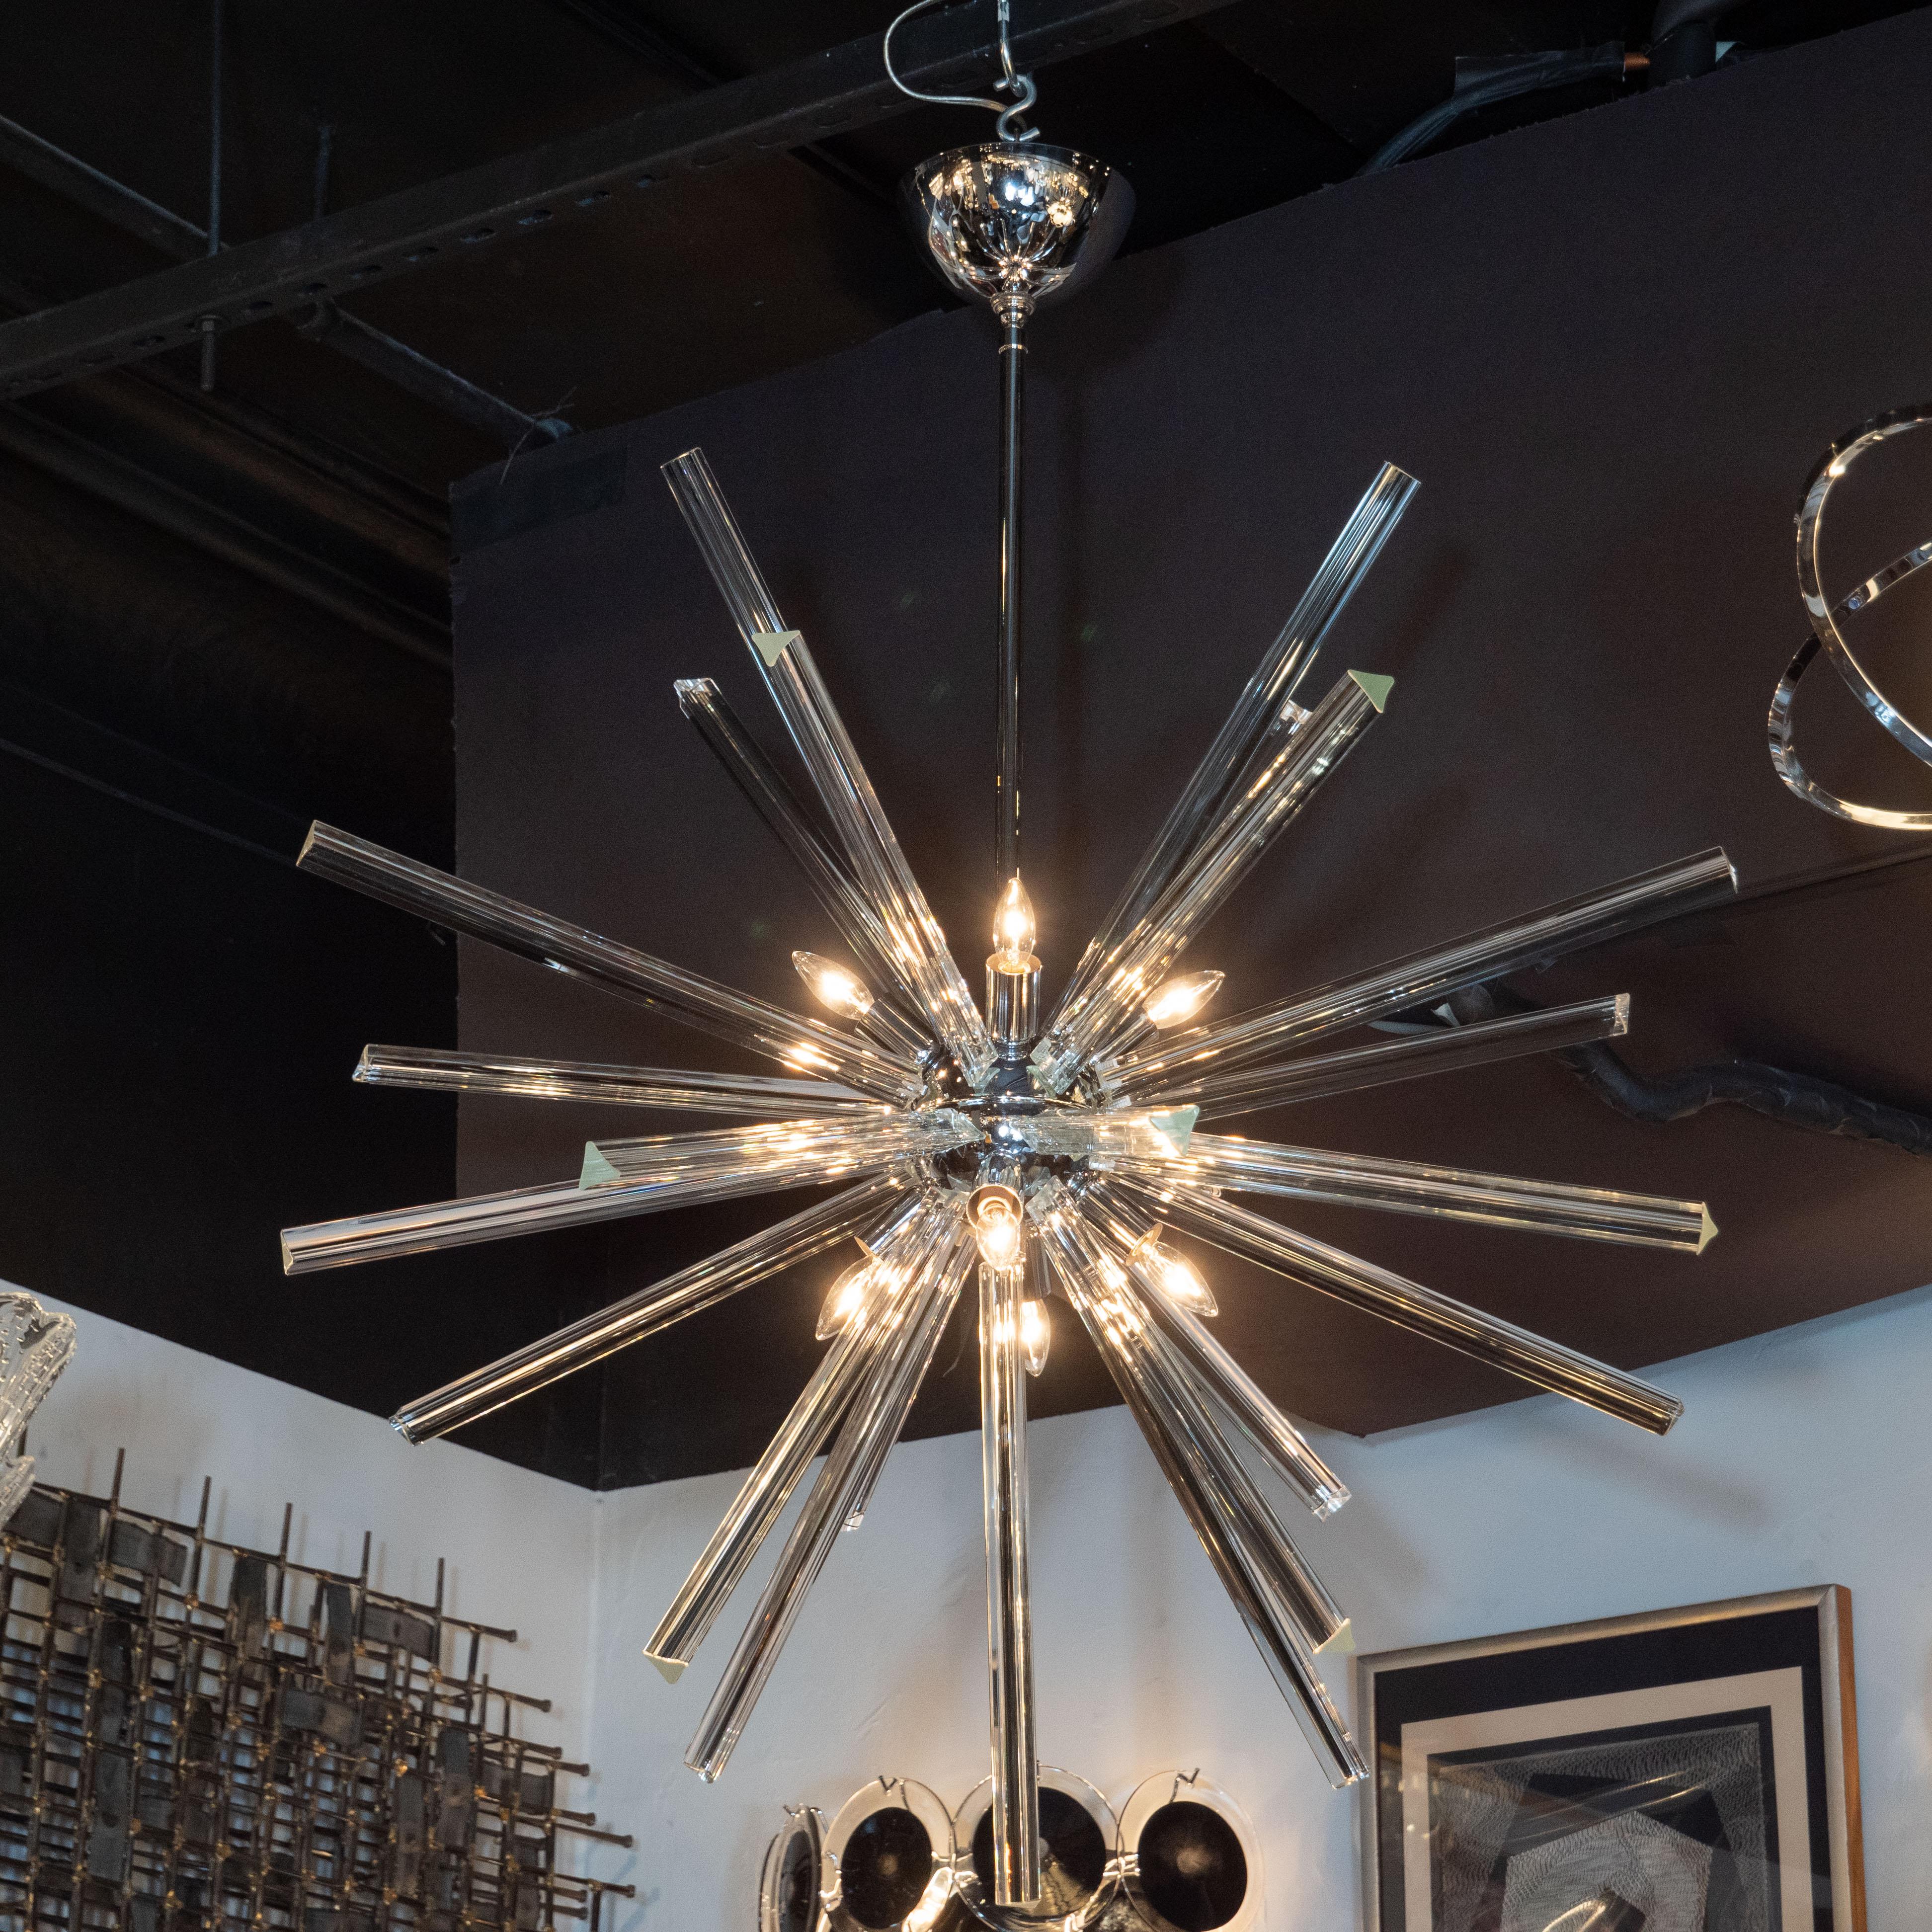 This elegant and graphic Sputnik chandelier was hand blown in Murano, Italy- the island off the coast of Venice renowned for centuries for its superlative glass production. It features a spherical central orb with an abundance of translucent hand